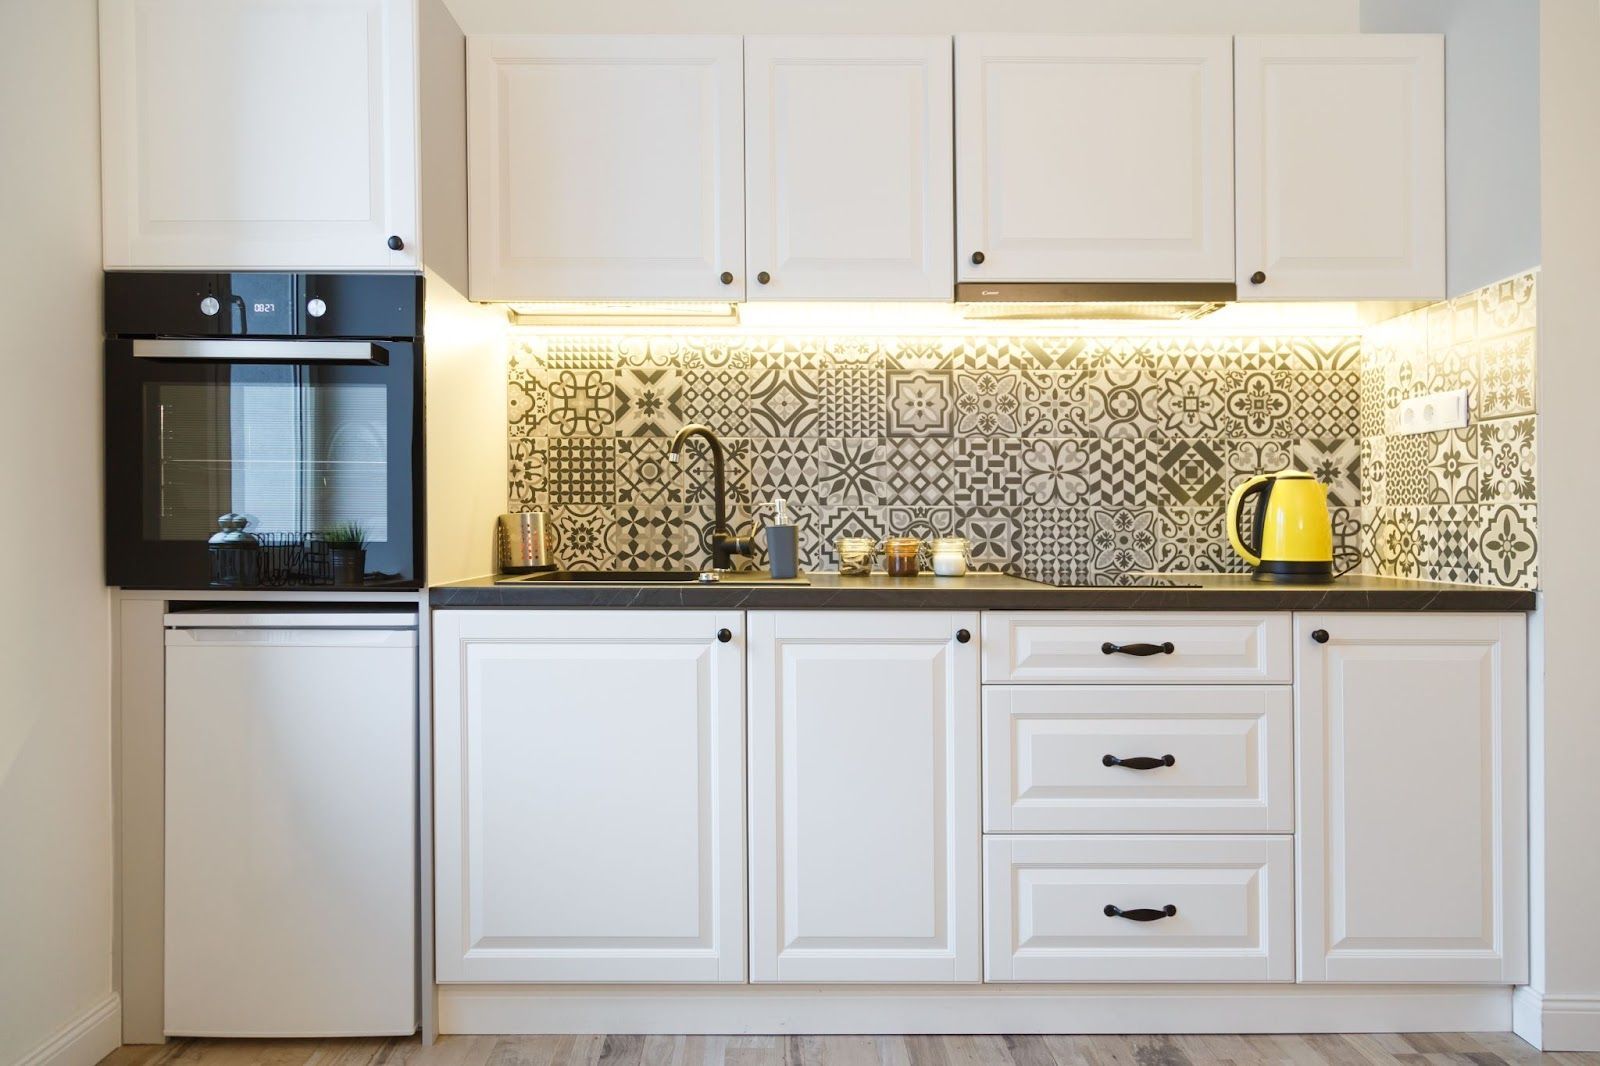 A kitchen with white cabinets , black appliances and a yellow kettle.